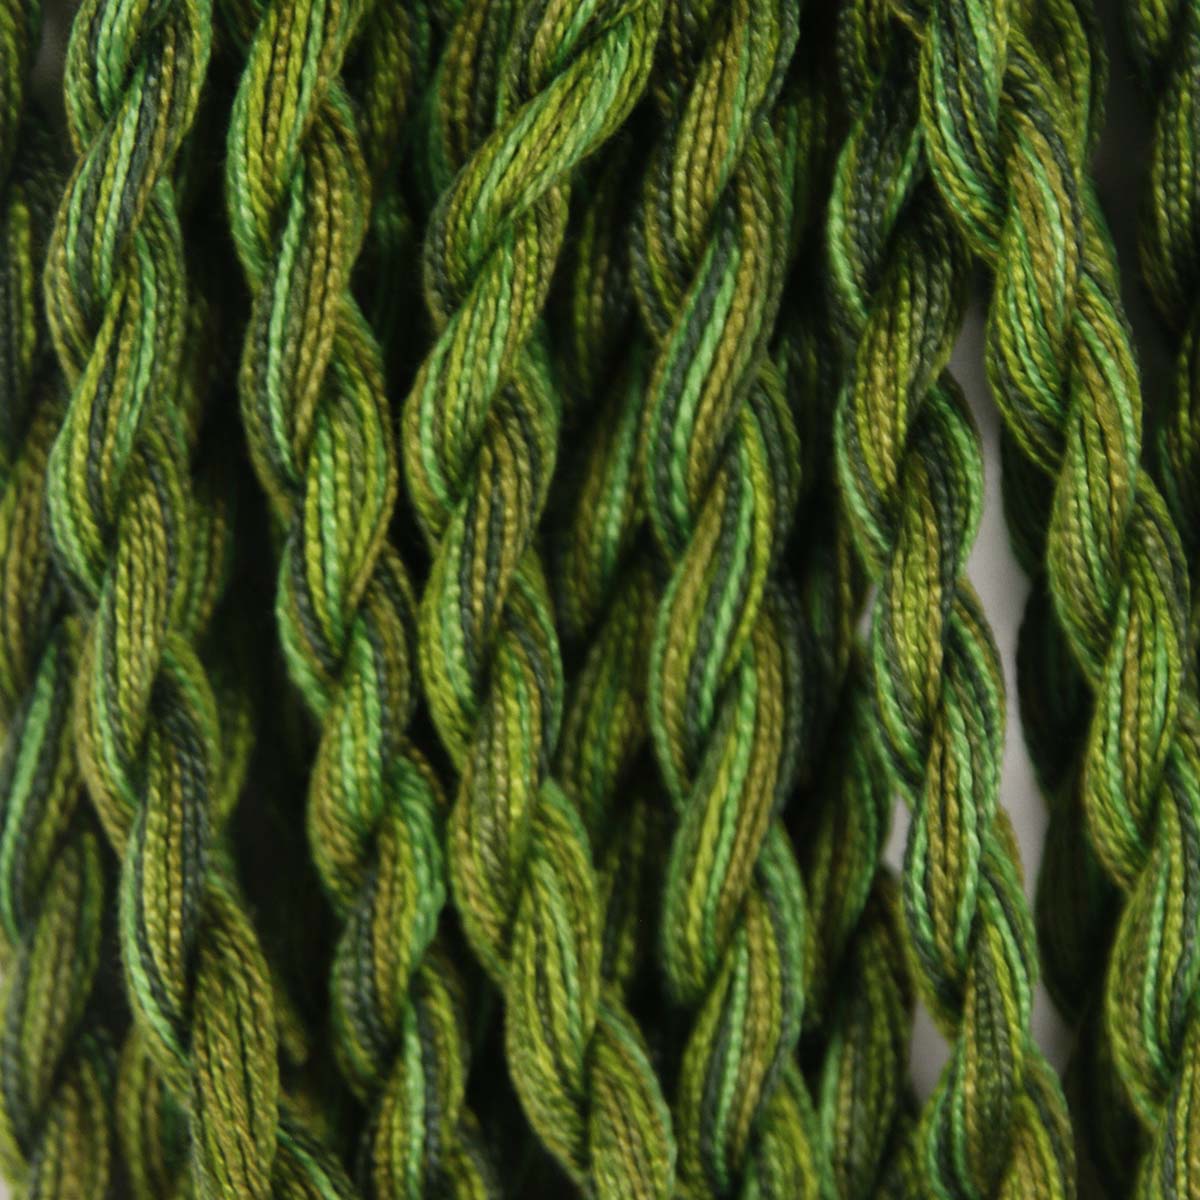 www.colourstreams.com.au Colour Streams Hand Dyed Cotton Threads Cotto Strands Slow Stitch Embroidery Textile Arts Fibre DL 49 Olivades Greens Olives